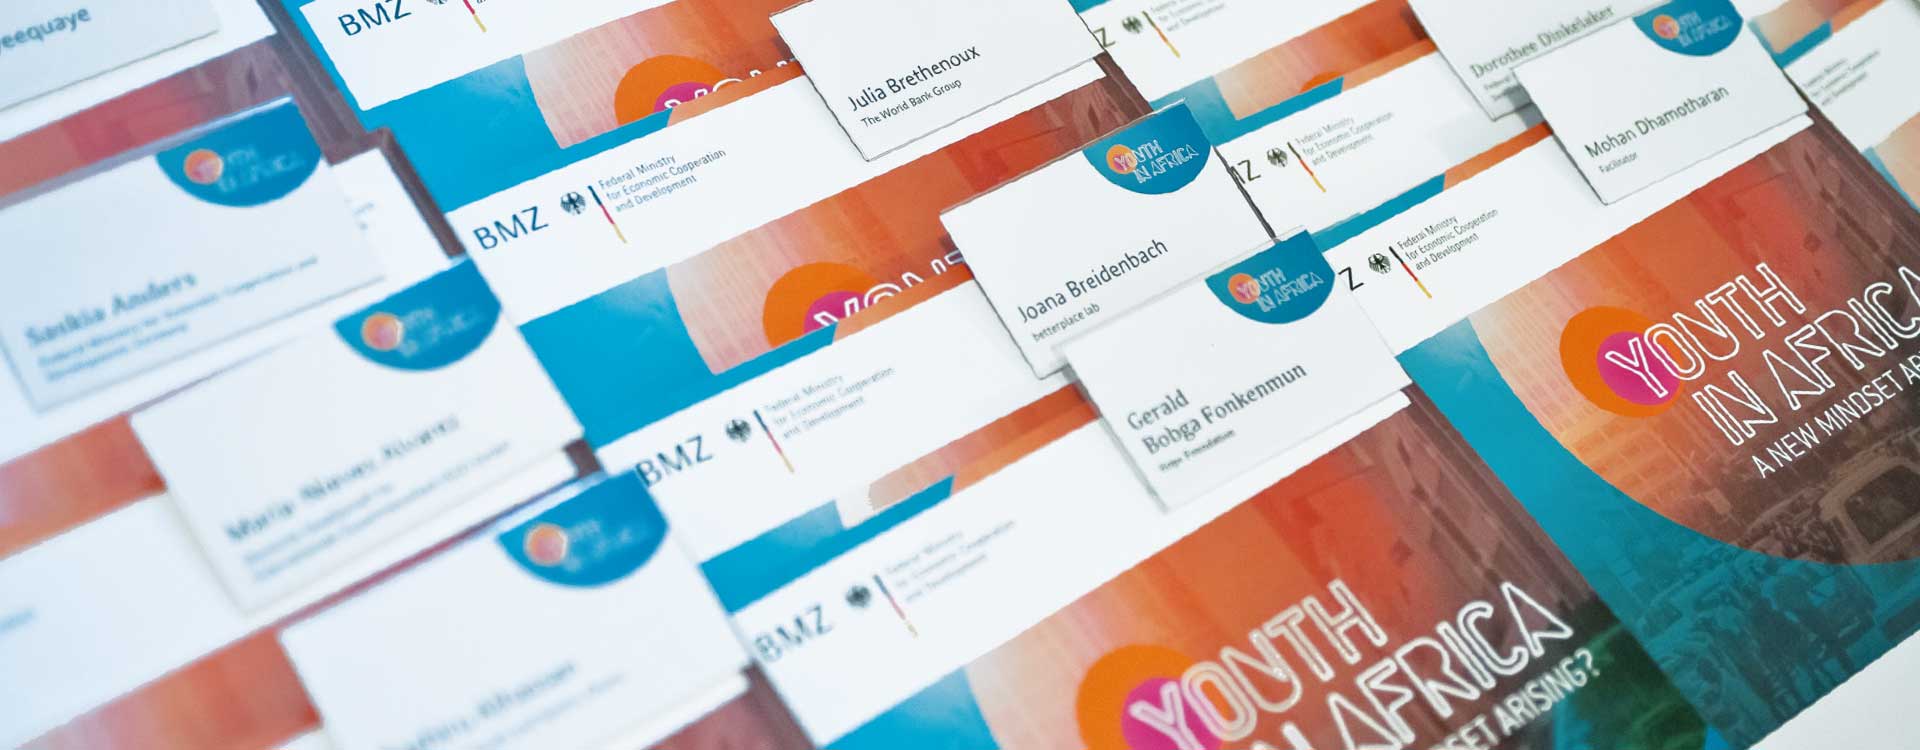 Folders and name badges for the Youth in Africa conference held by the BMZ in the Umspannwerk Kreuzberg, Berlin; Design: Kattrin Richter | Graphic Design Studio